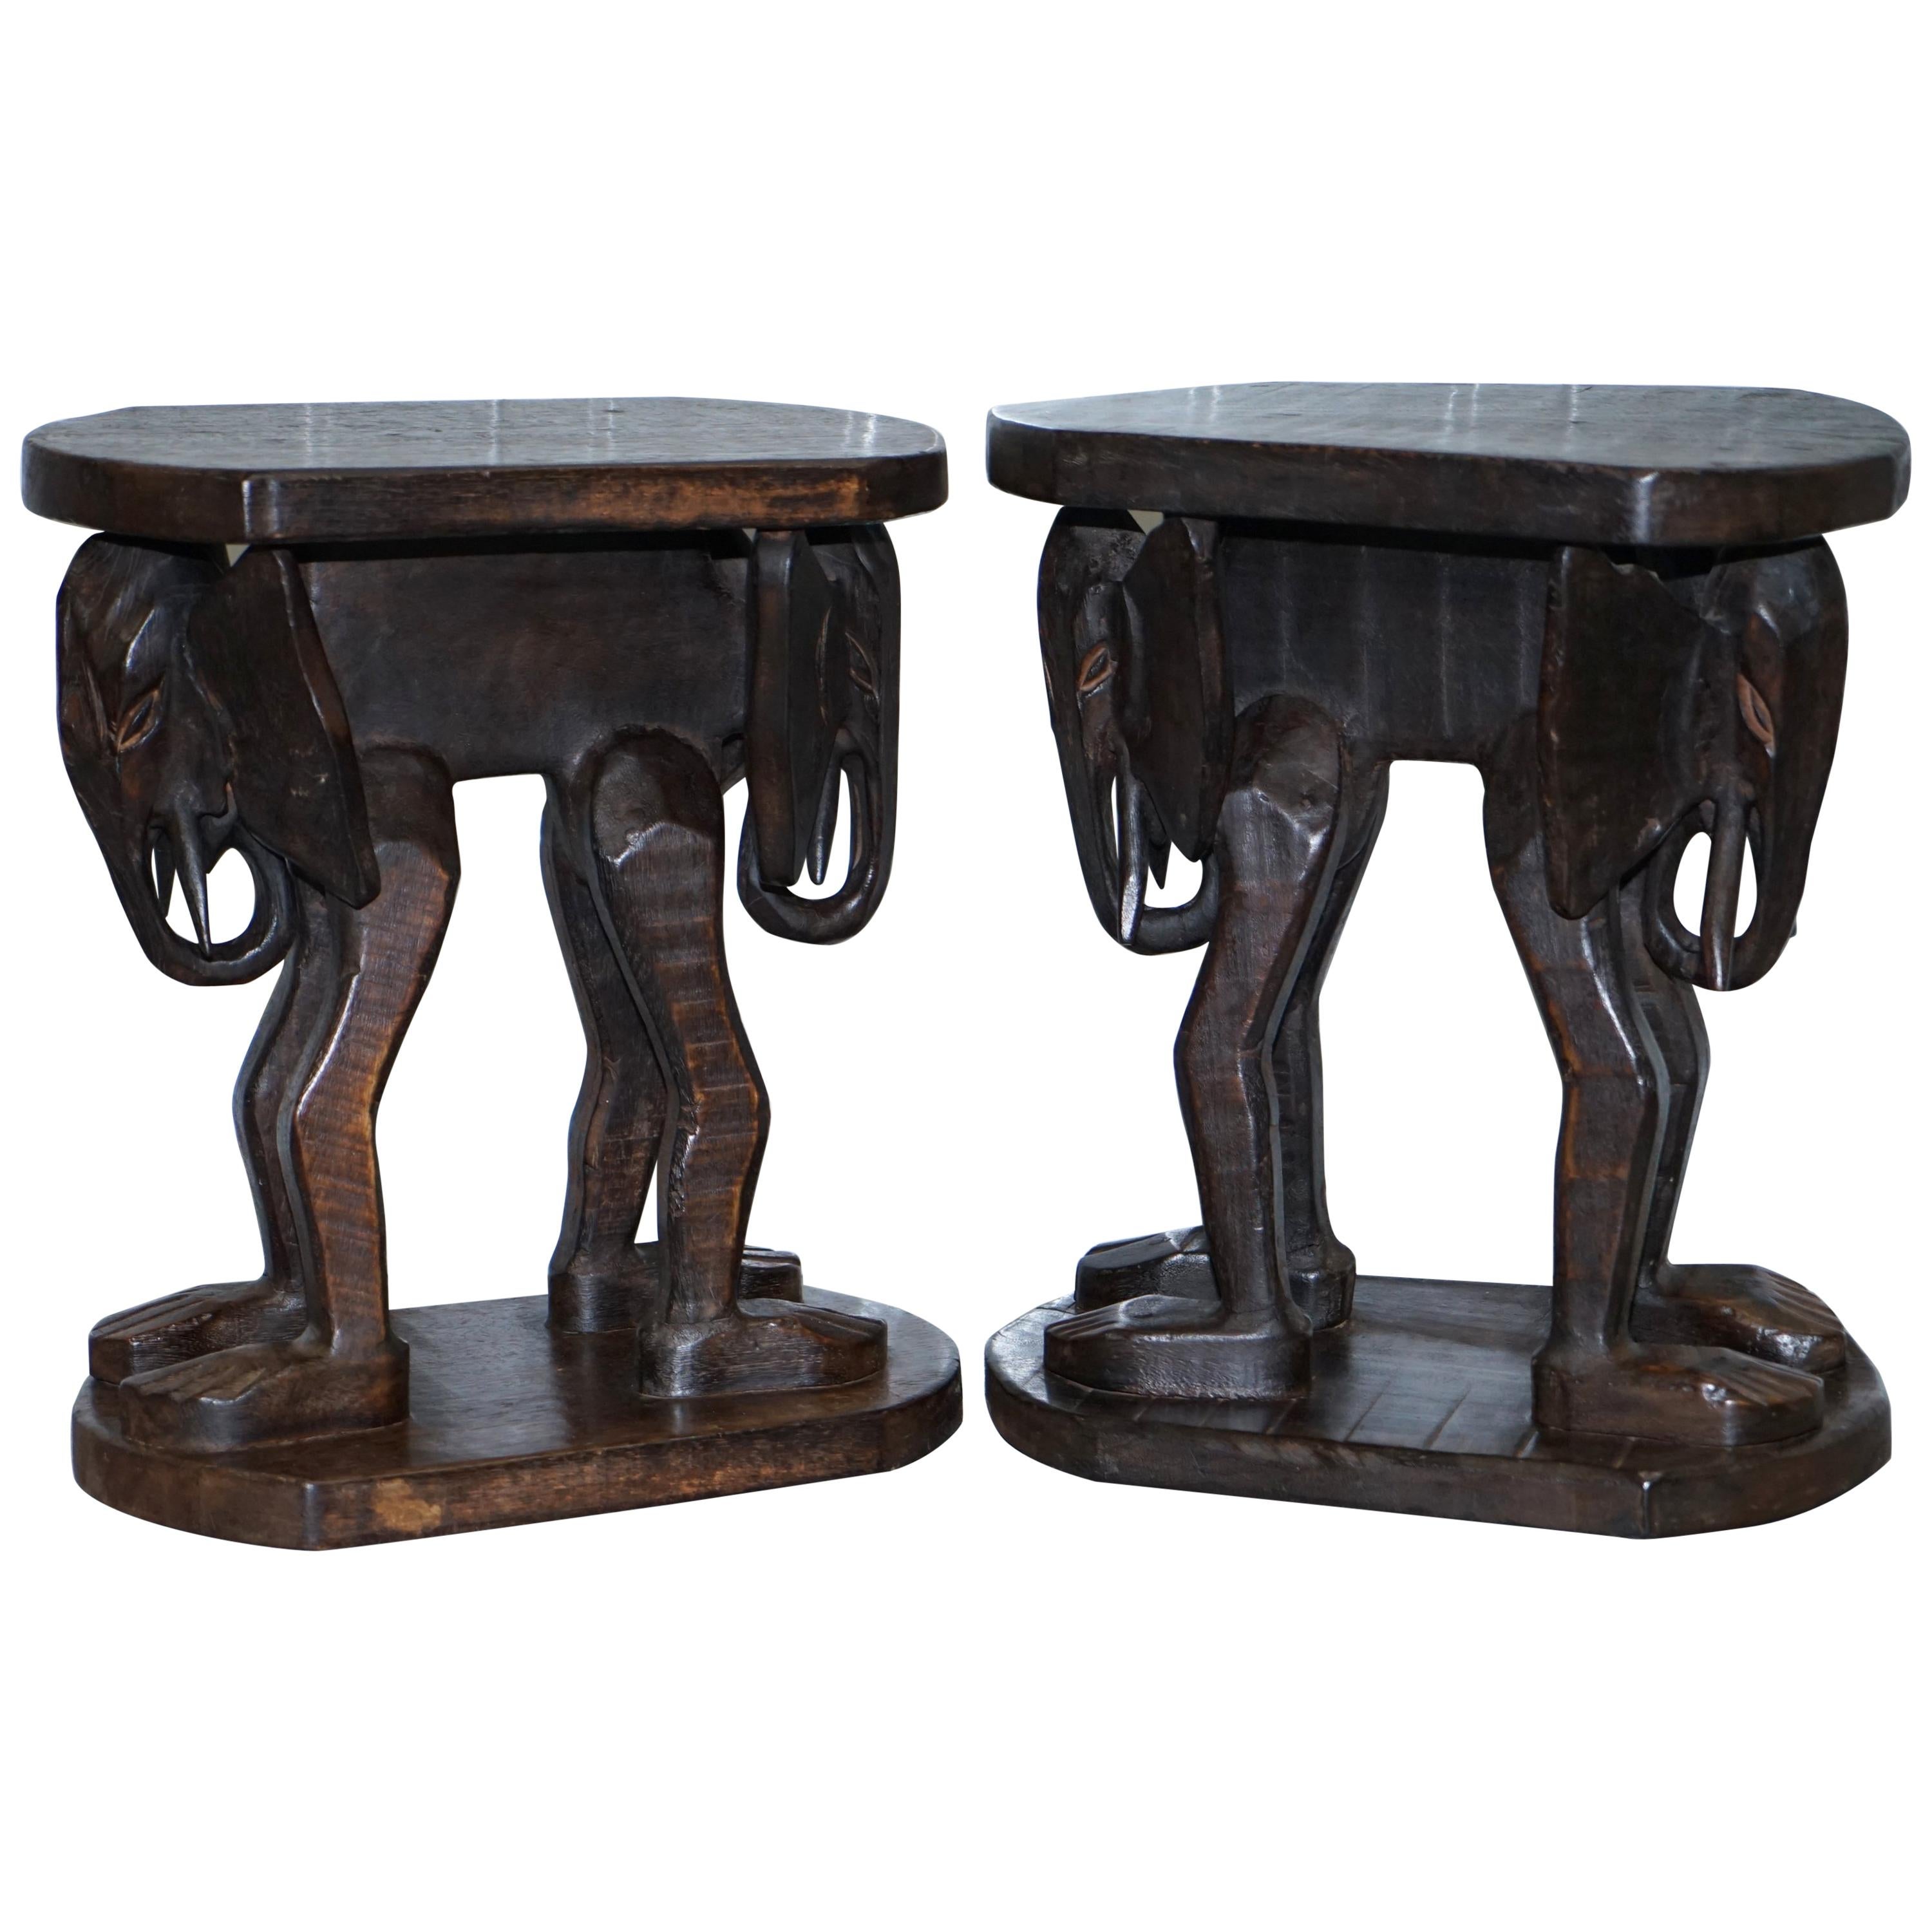 Lovely Pair of Vintage Hand Carved Solid Wood Safari Tables Depicting Elephants